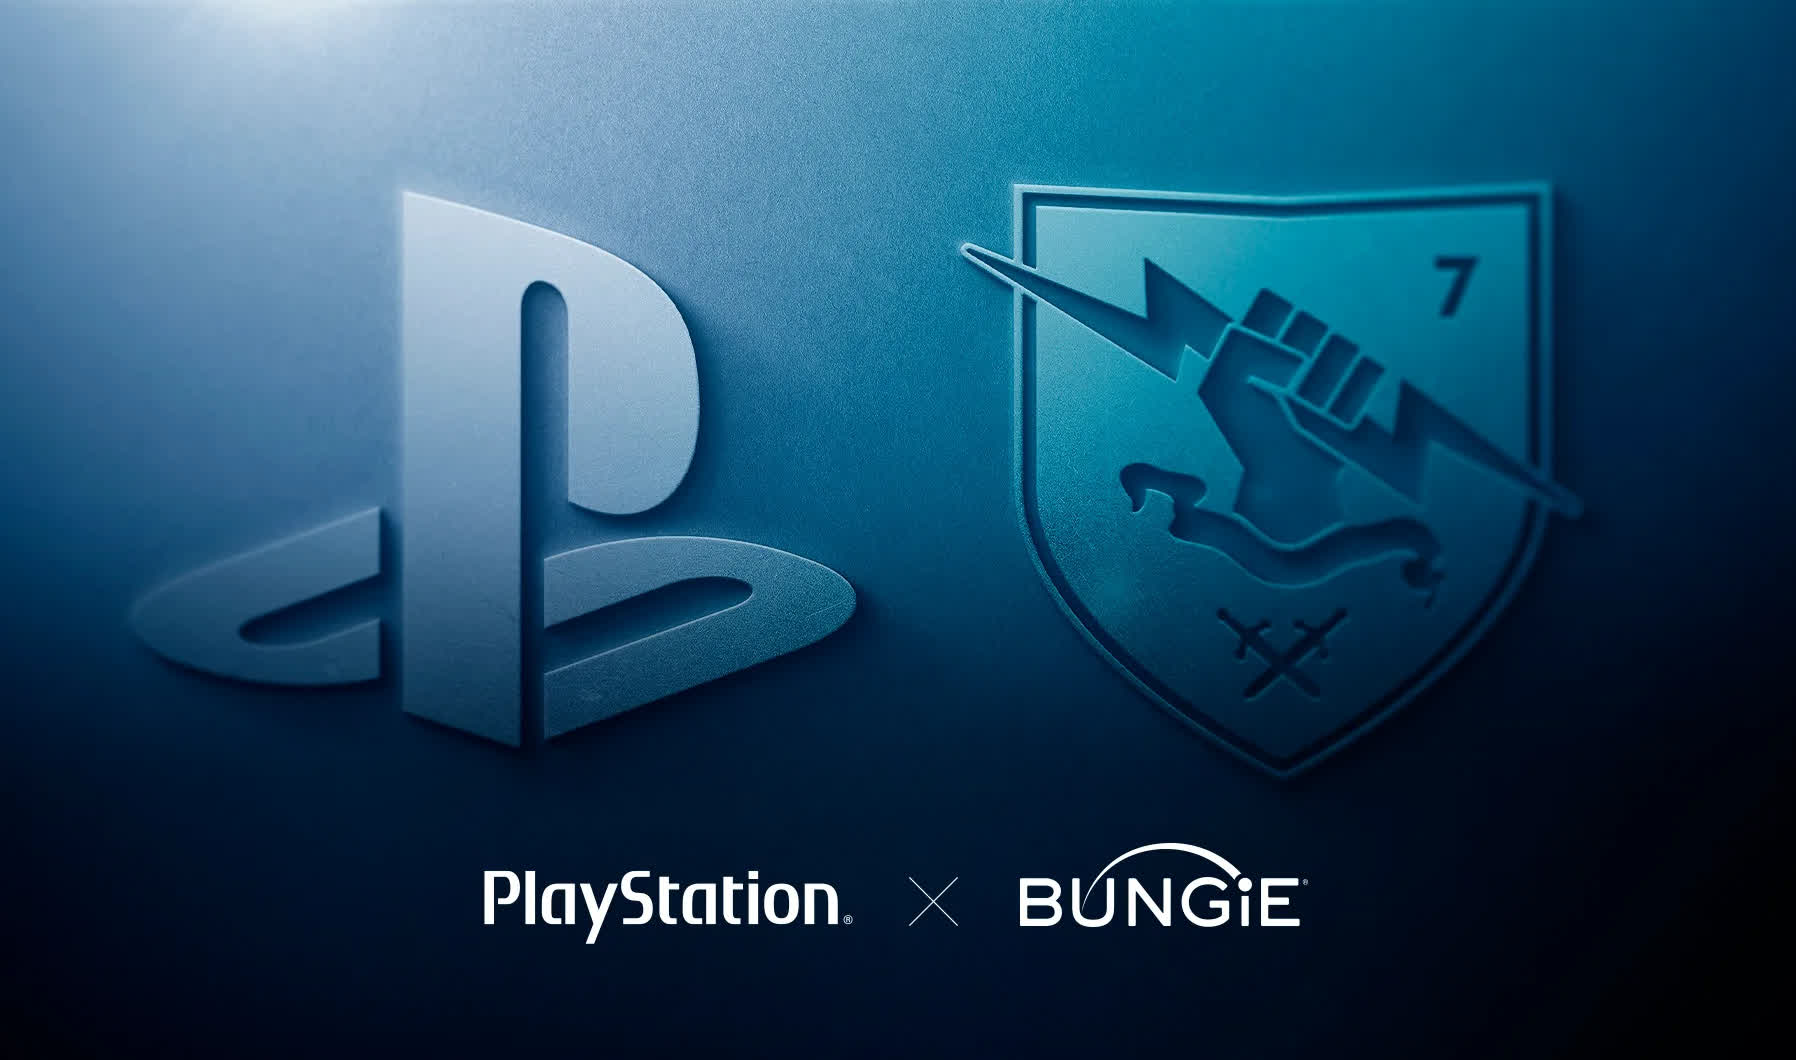 Sony answers Microsoft's acquisition of Activision Blizzard by purchasing Bungie for $3.6 billion